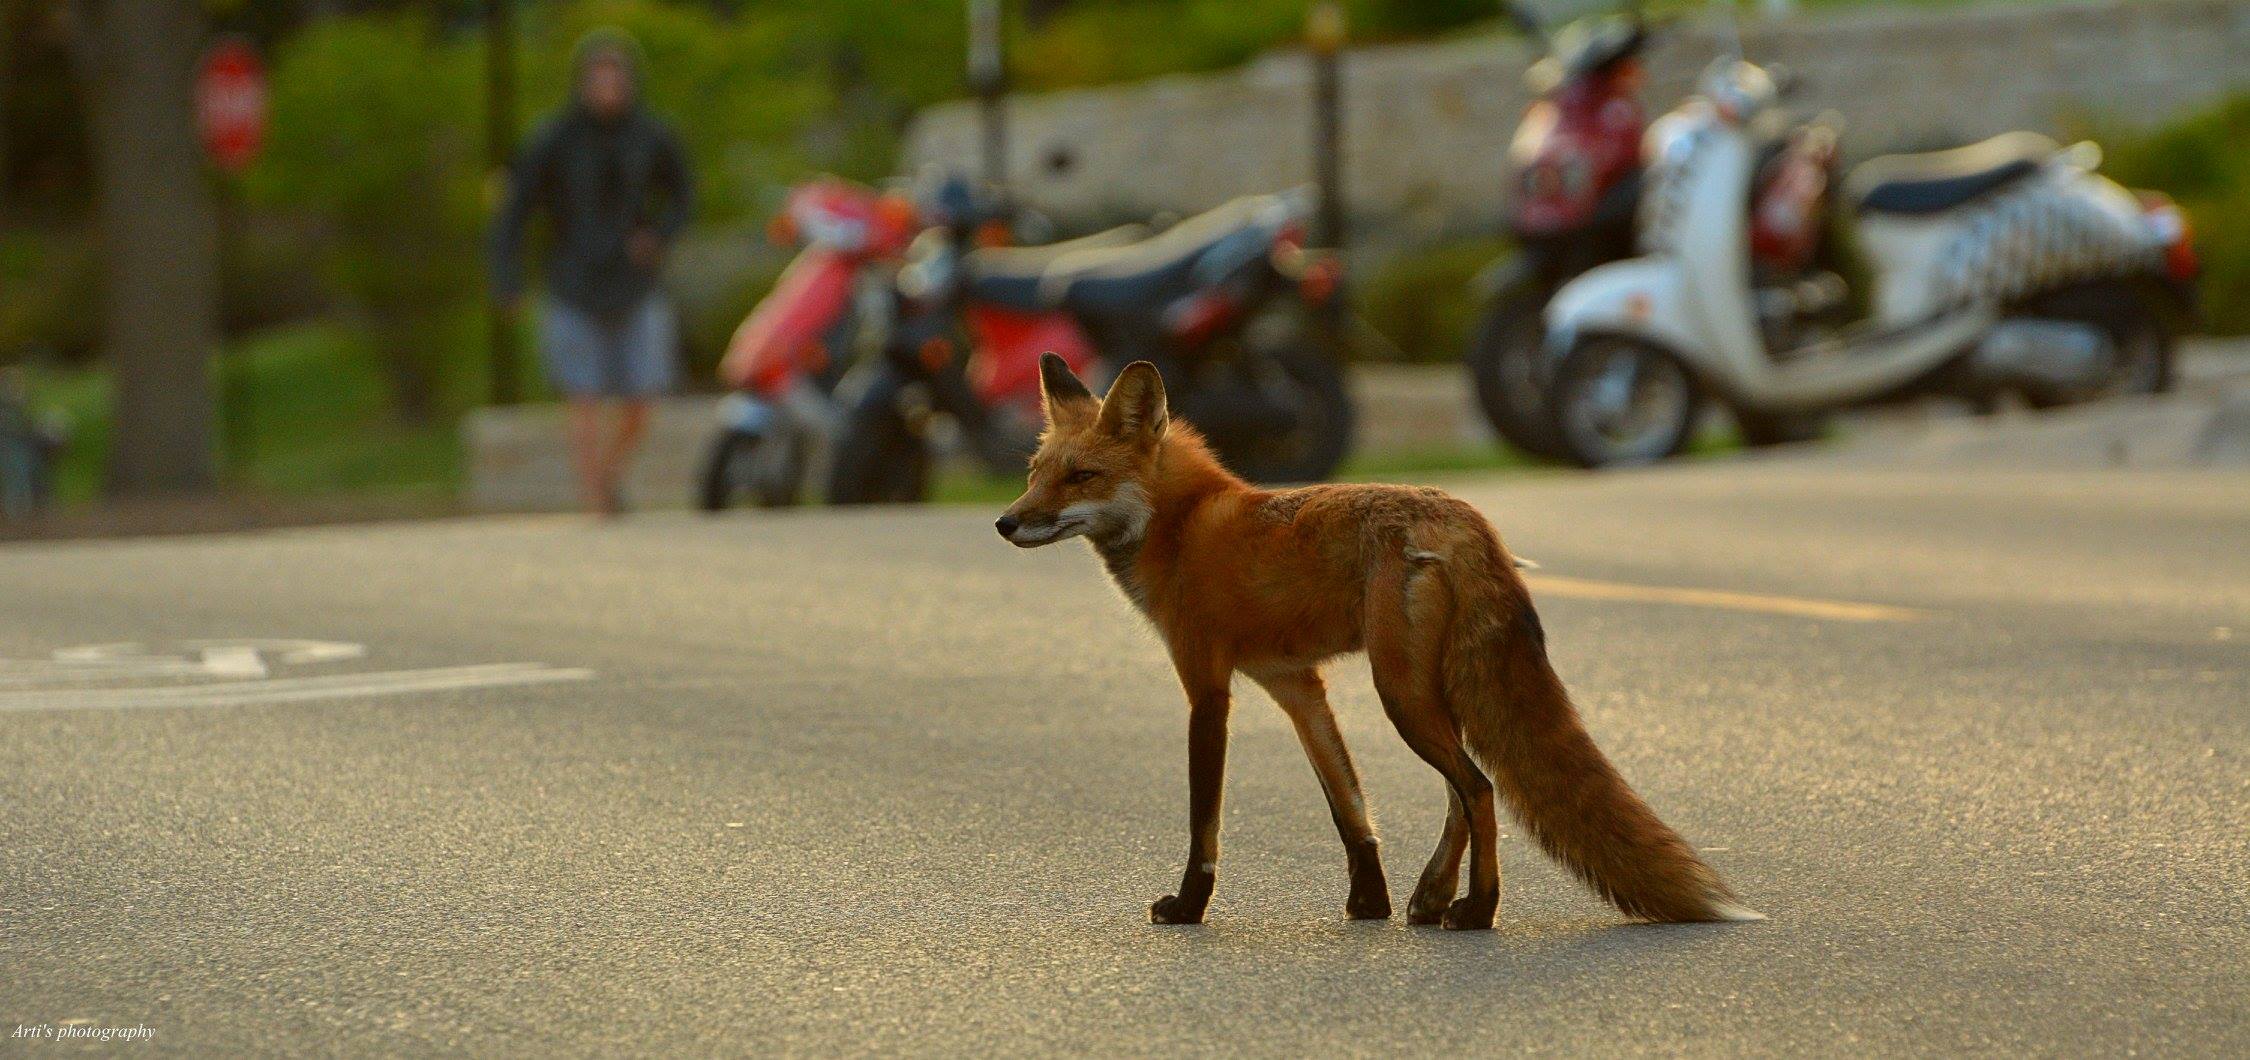 A fox wanders through a city street in Madison, Wisconsin.